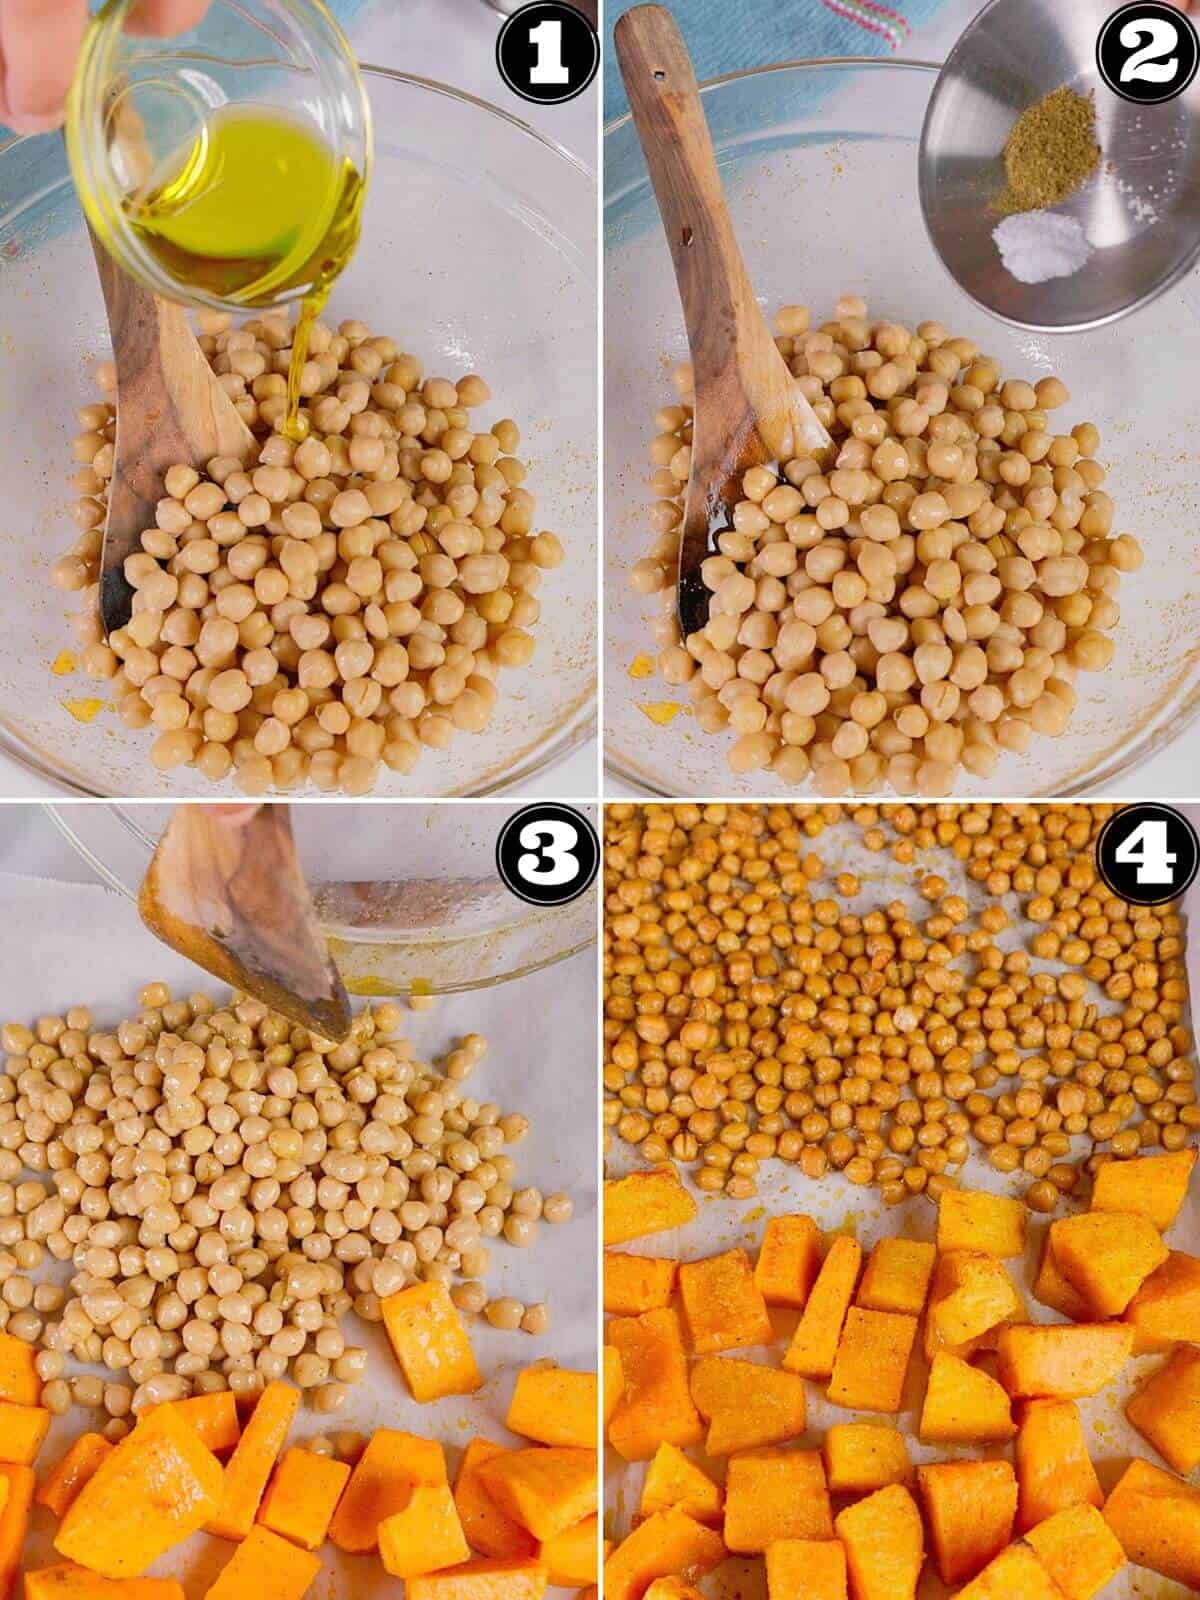 Making of the roasted chickpeas.